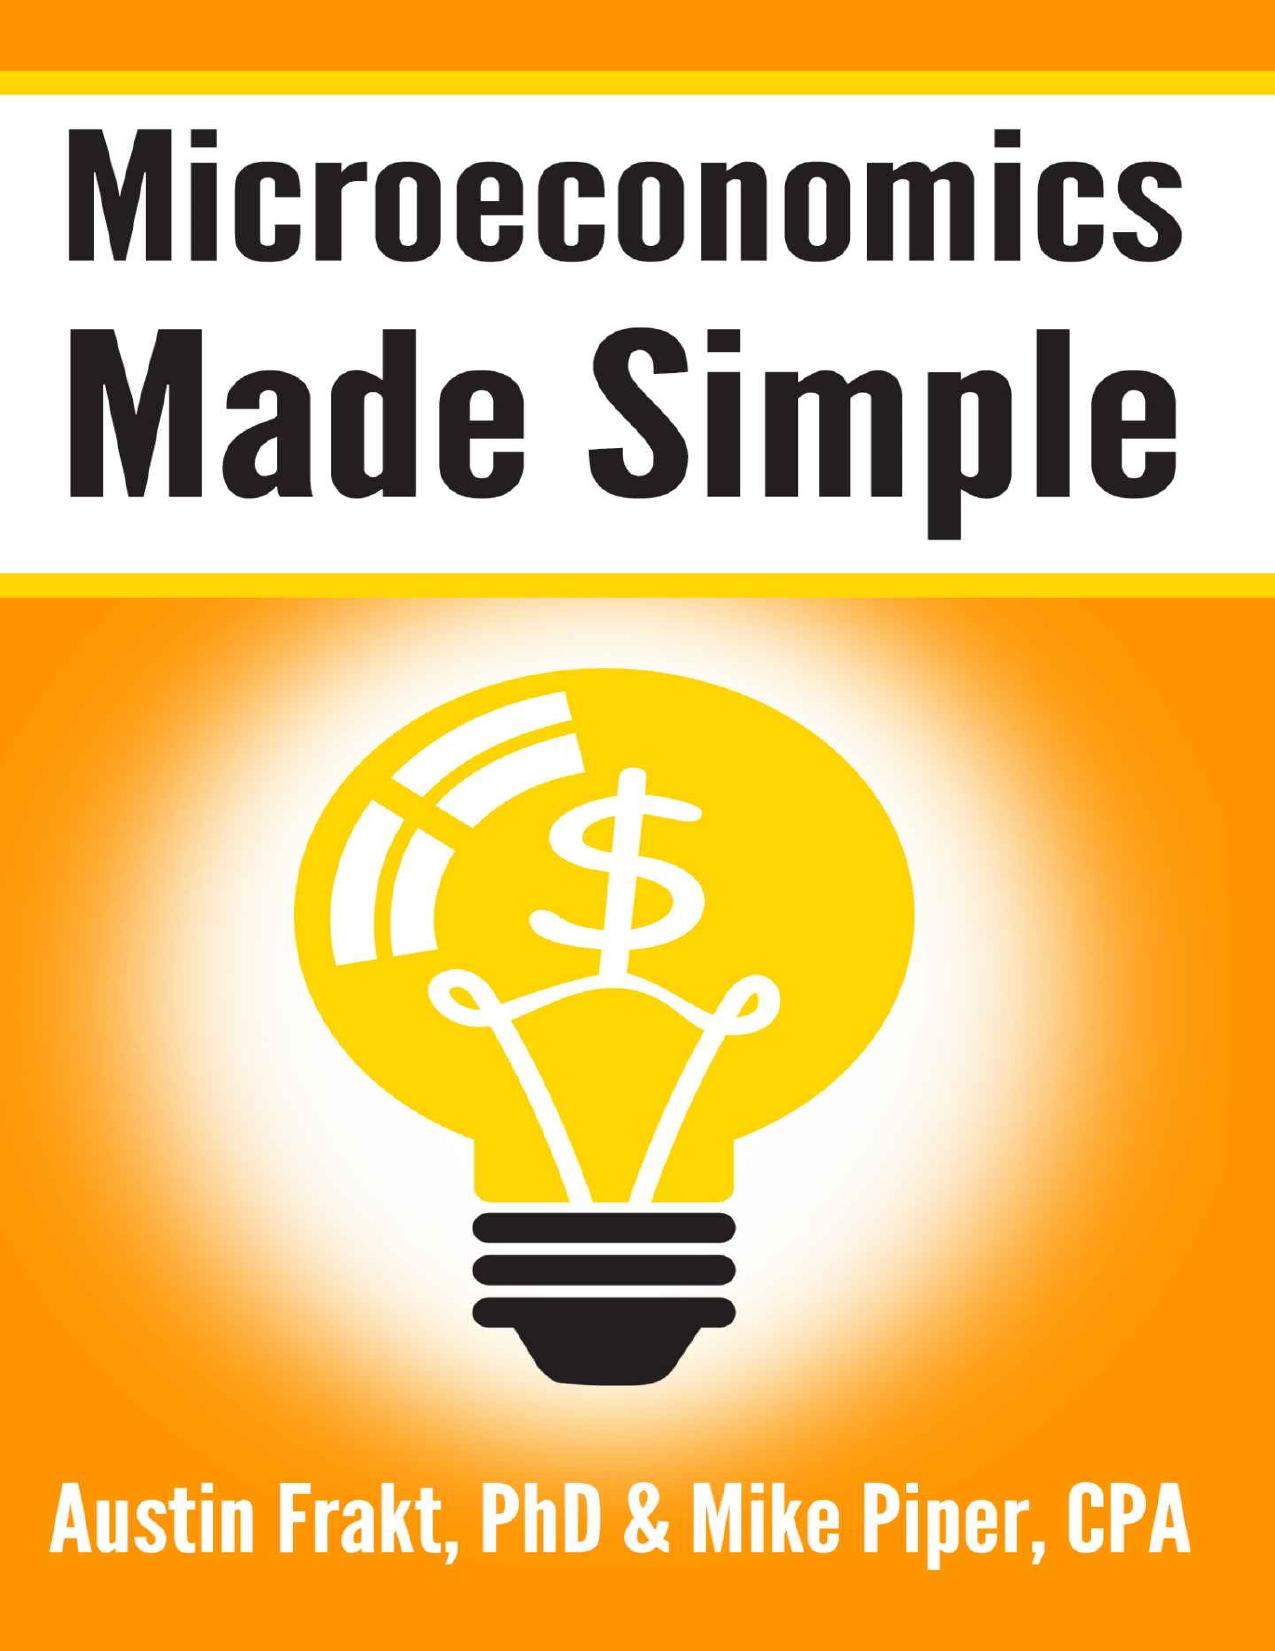 Microeconomics Made Simple: Basic Microeconomic Principles Explained in 100 Pages or Less - PDFDrive.com